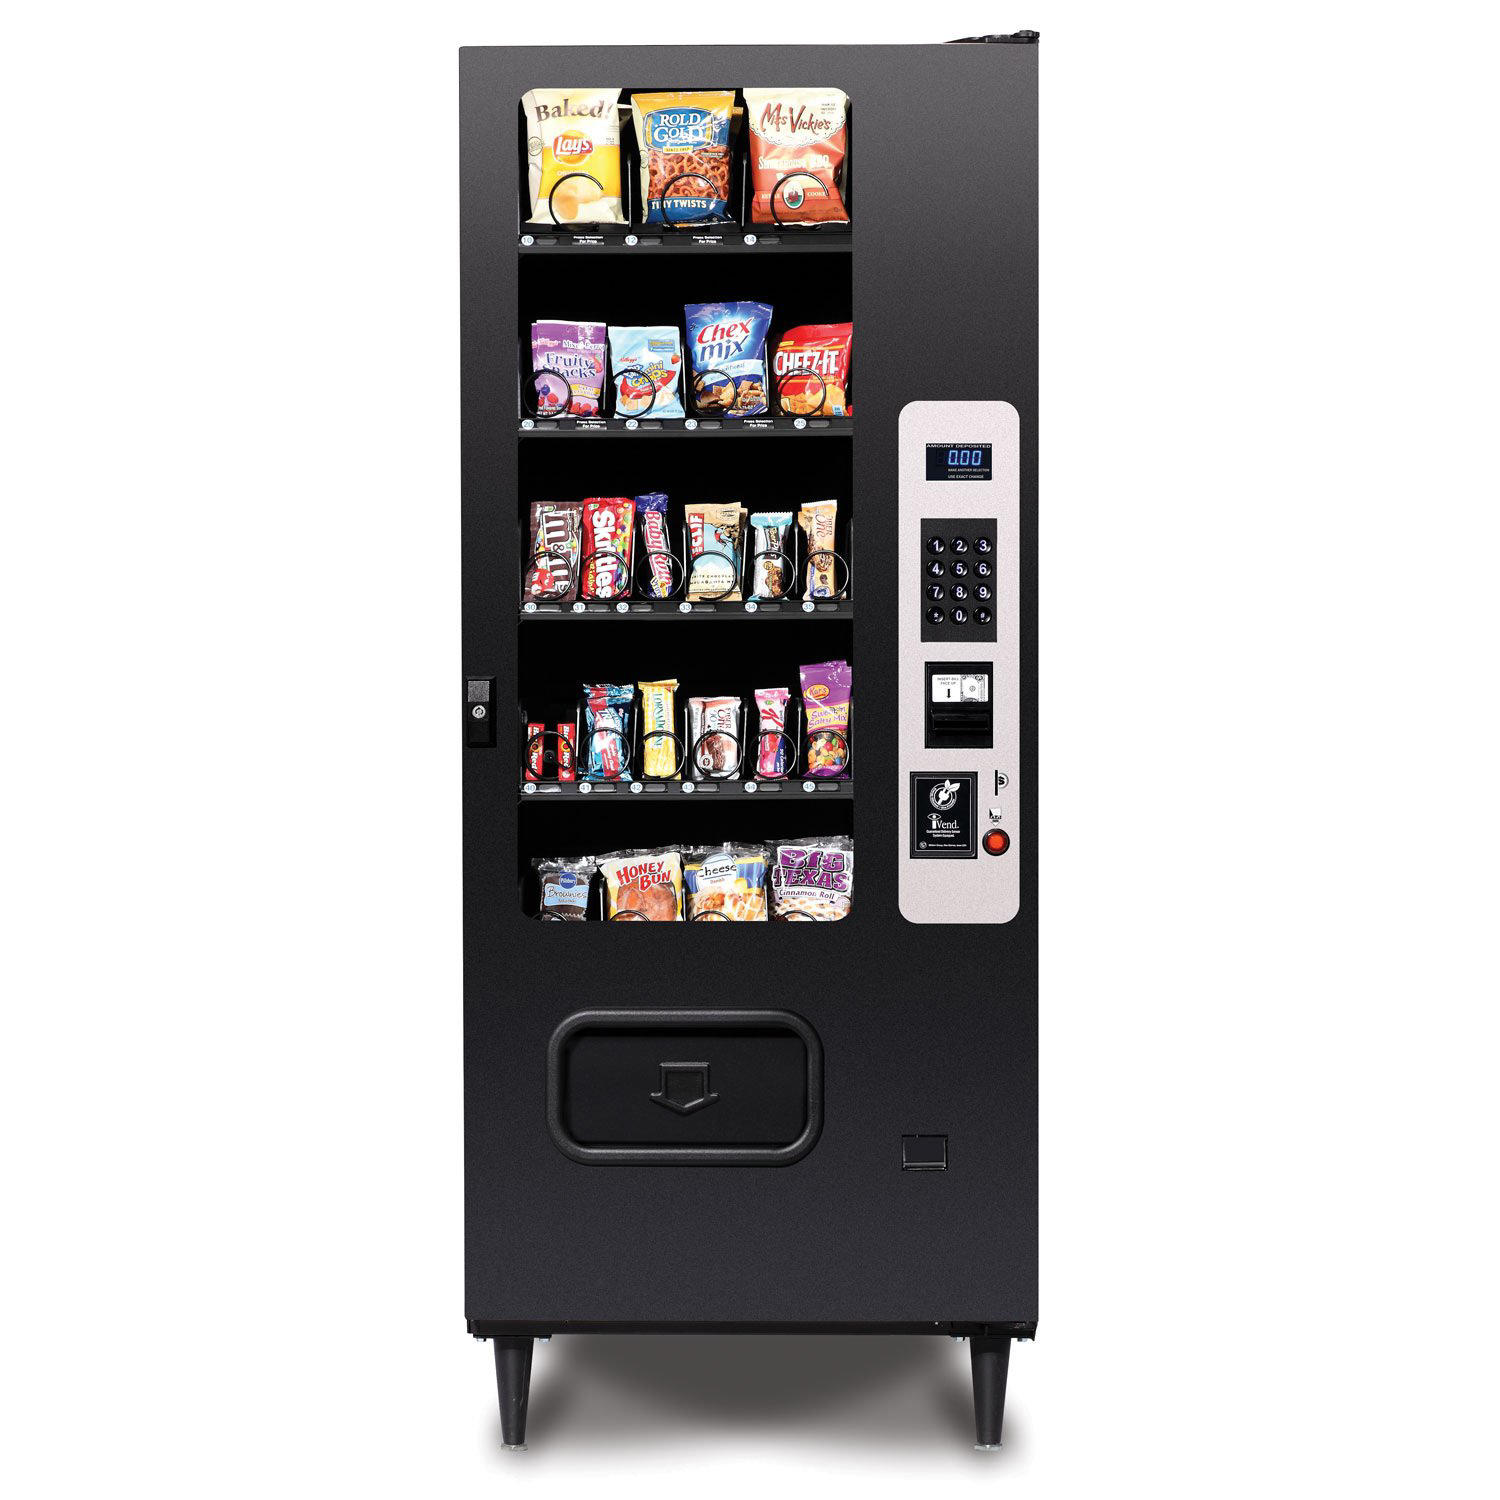 Selectivend SV3000 23-Selection Snack Vending Machine with Card Reader